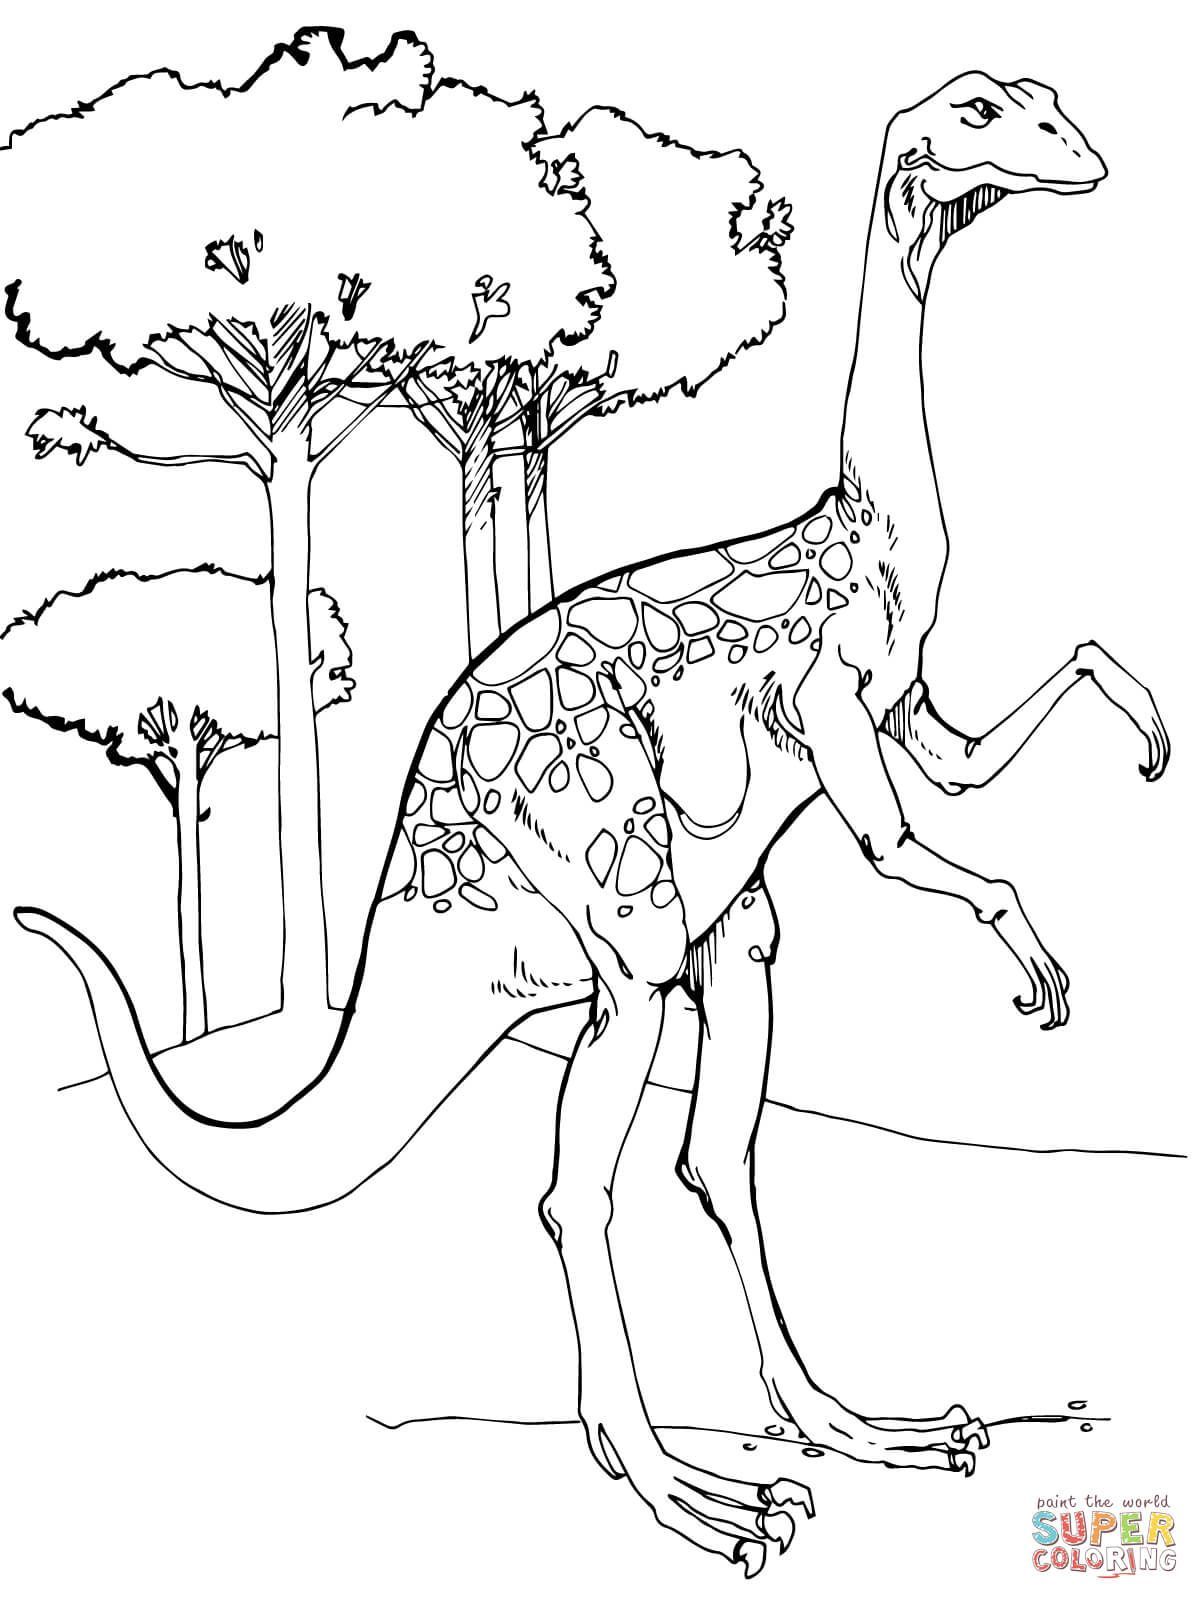 Gallimimus Dinosaur Coloring Pages